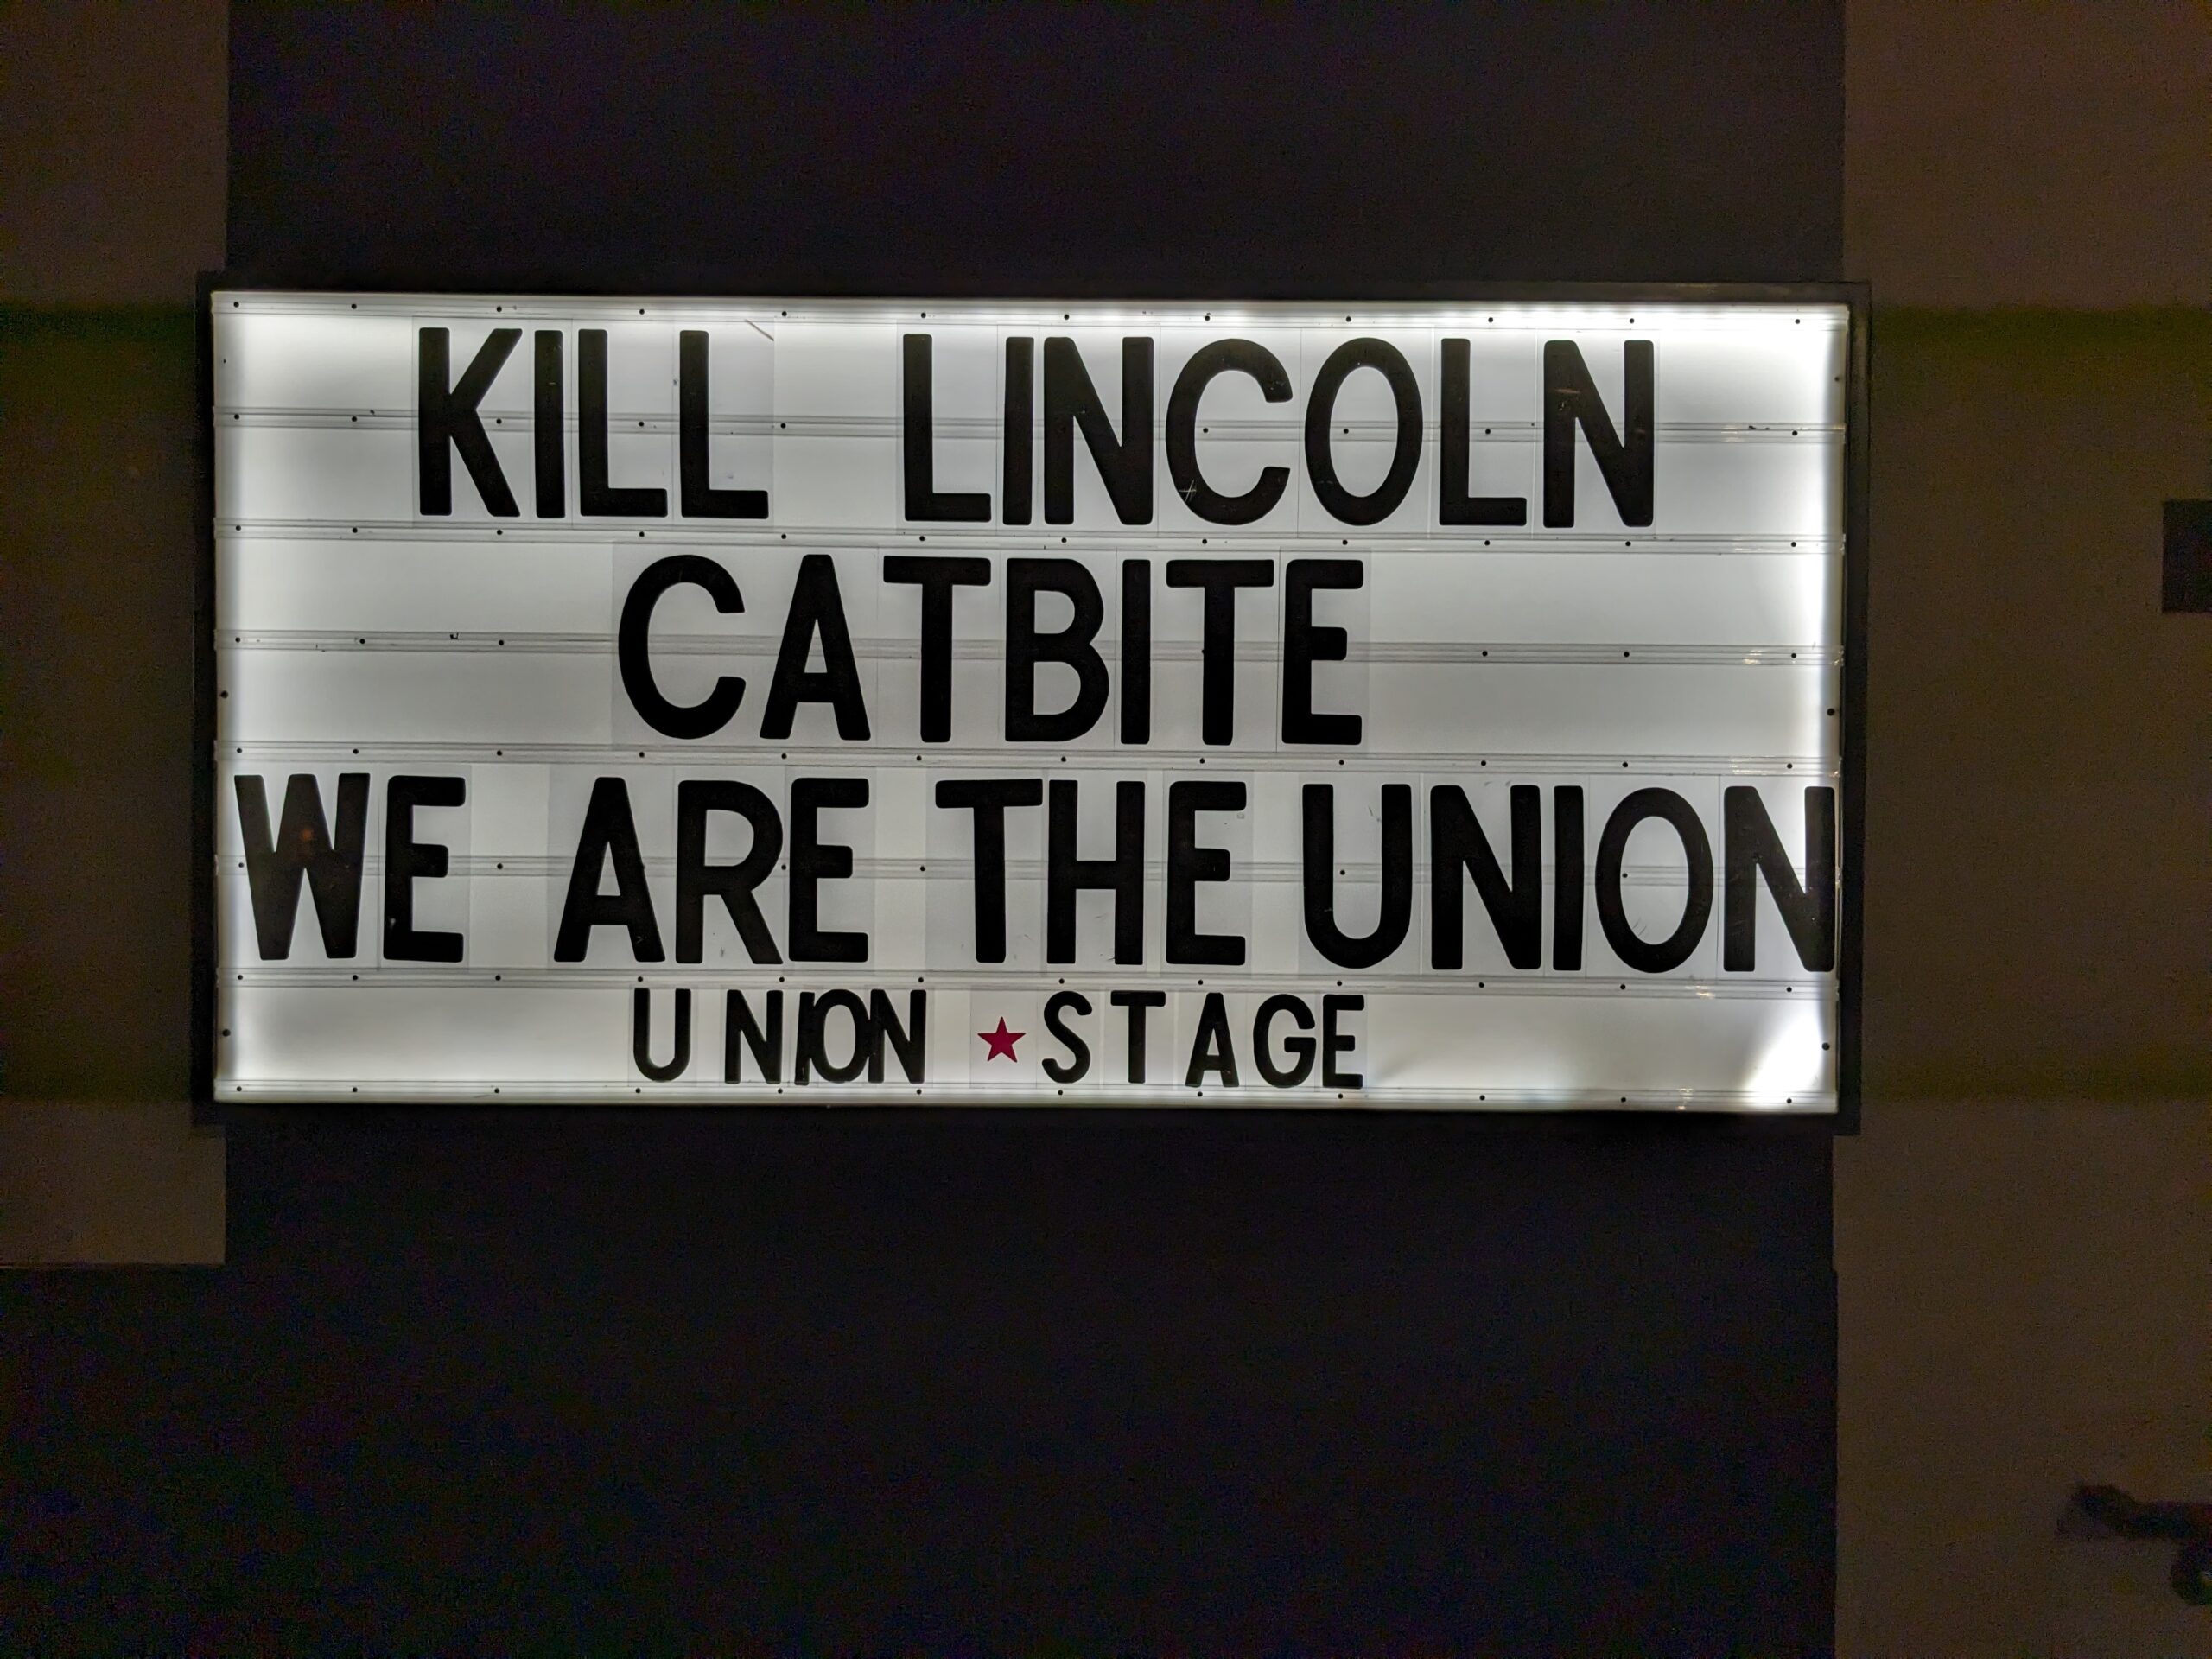 Bad Time Records 2023 Concert: We Are the Union, Catbite, and Kill Lincoln